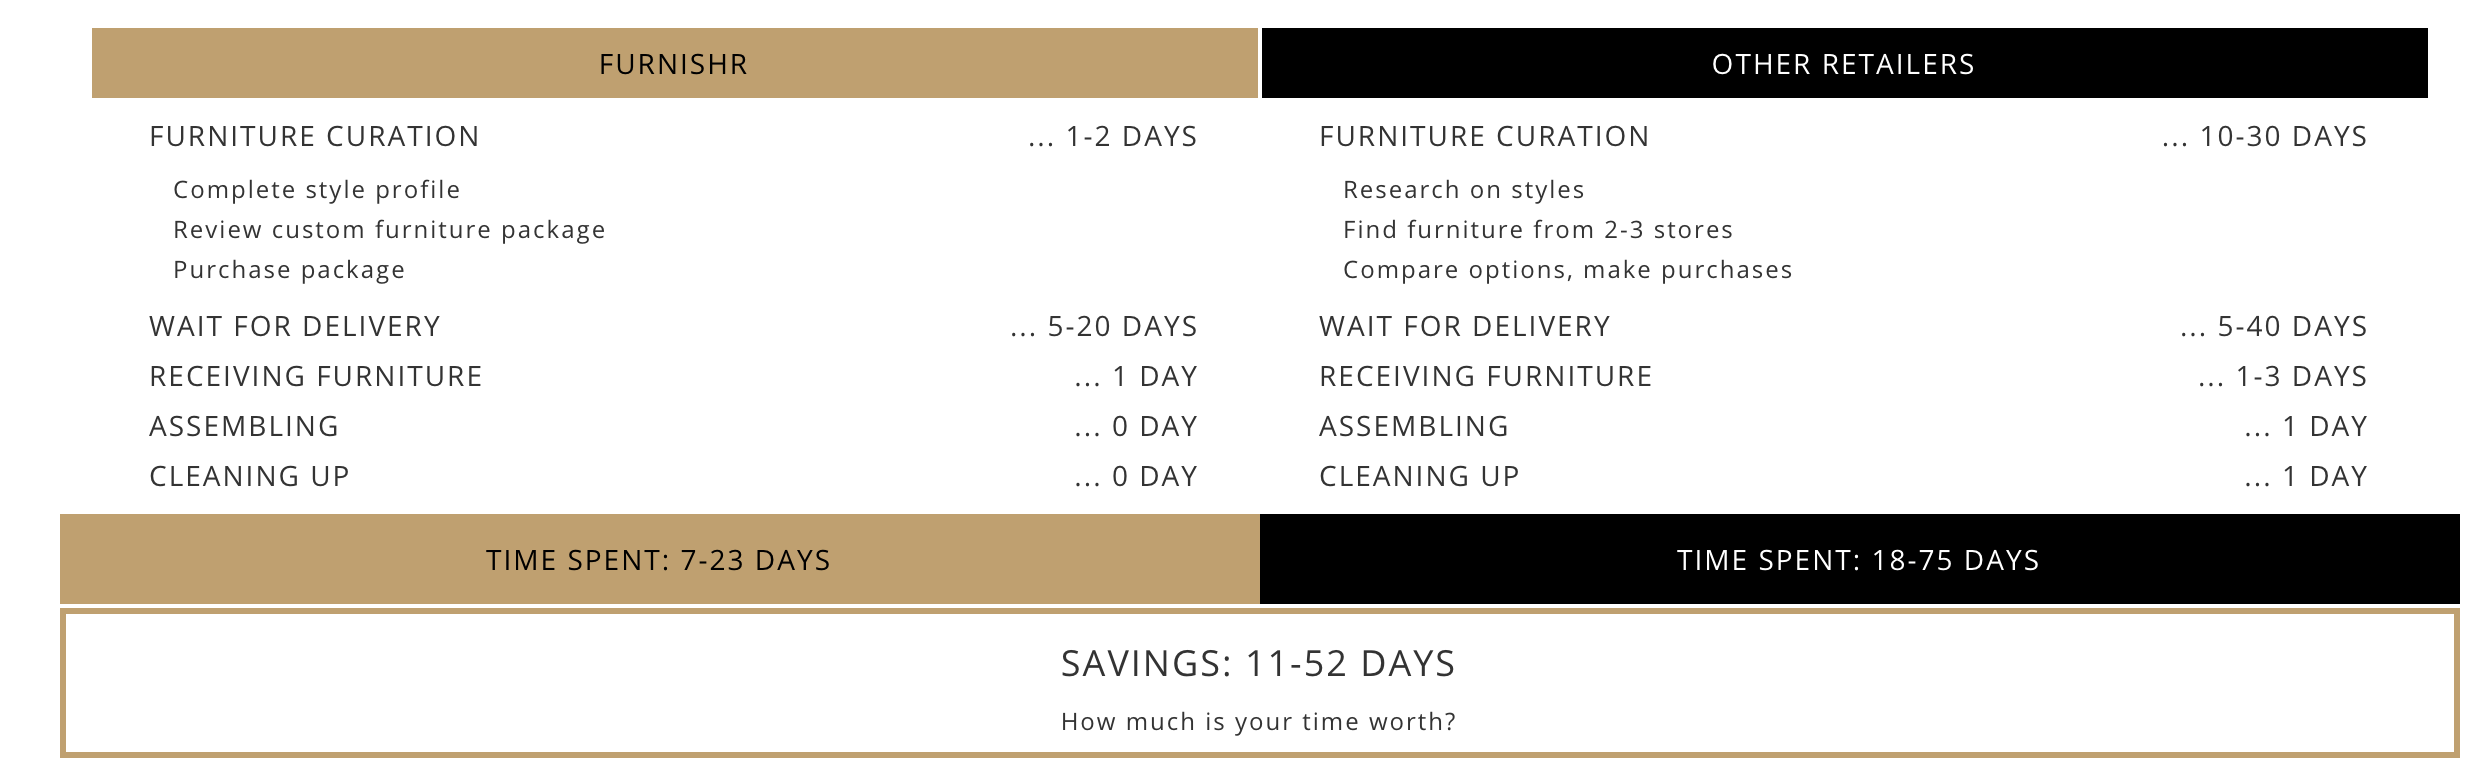 Compare the time savings from Furnishr to traditional solutions